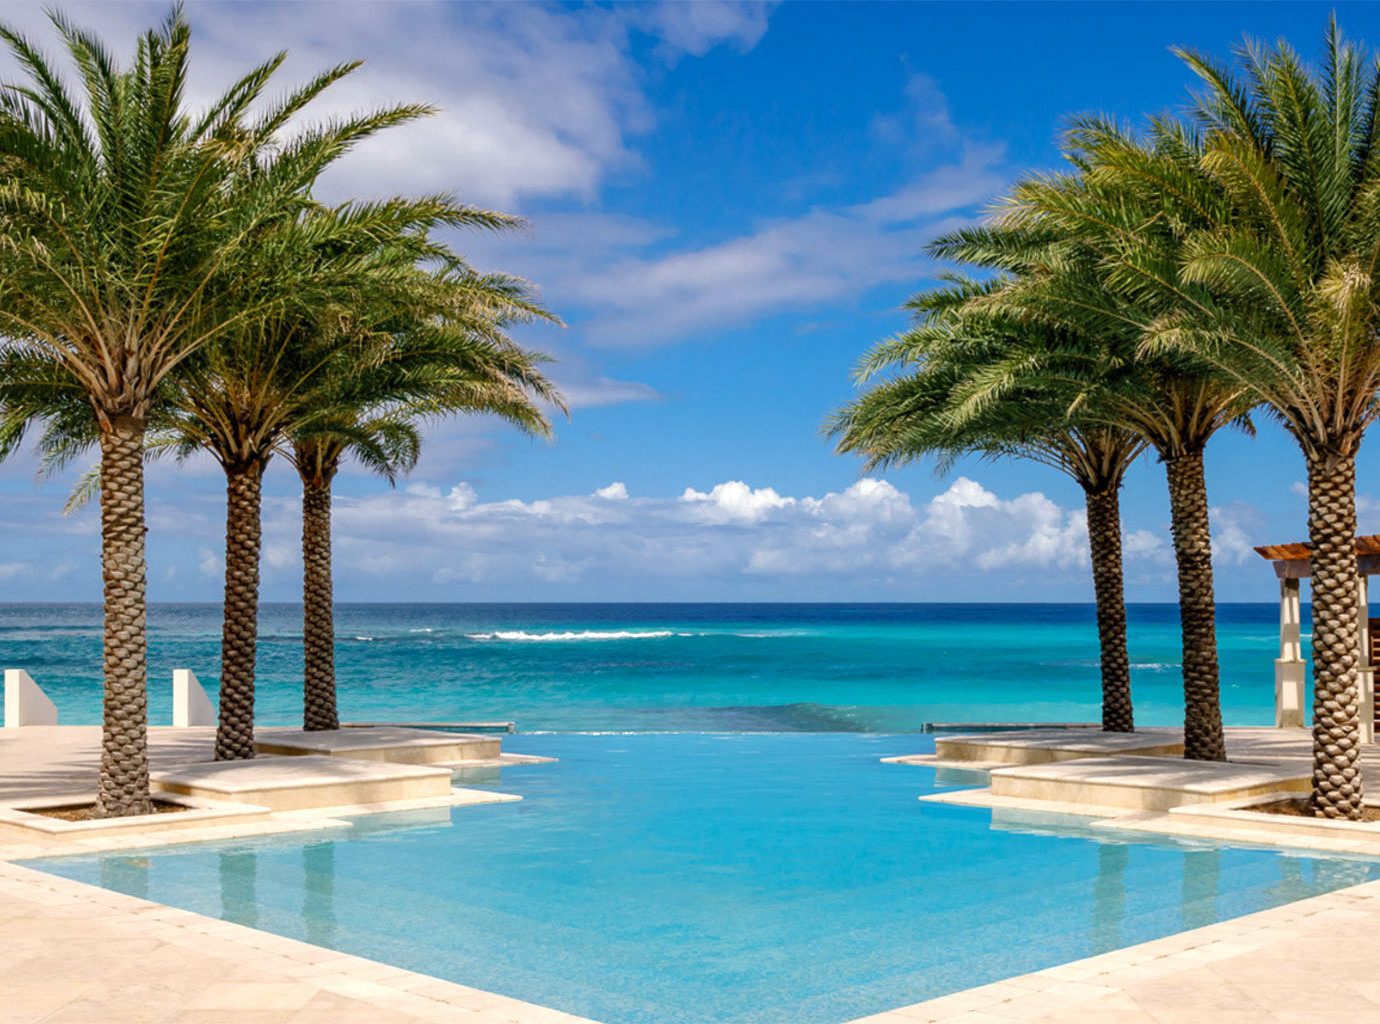 Infinity Pool At The Zemi Beach House Resort And Spa In Anguilla